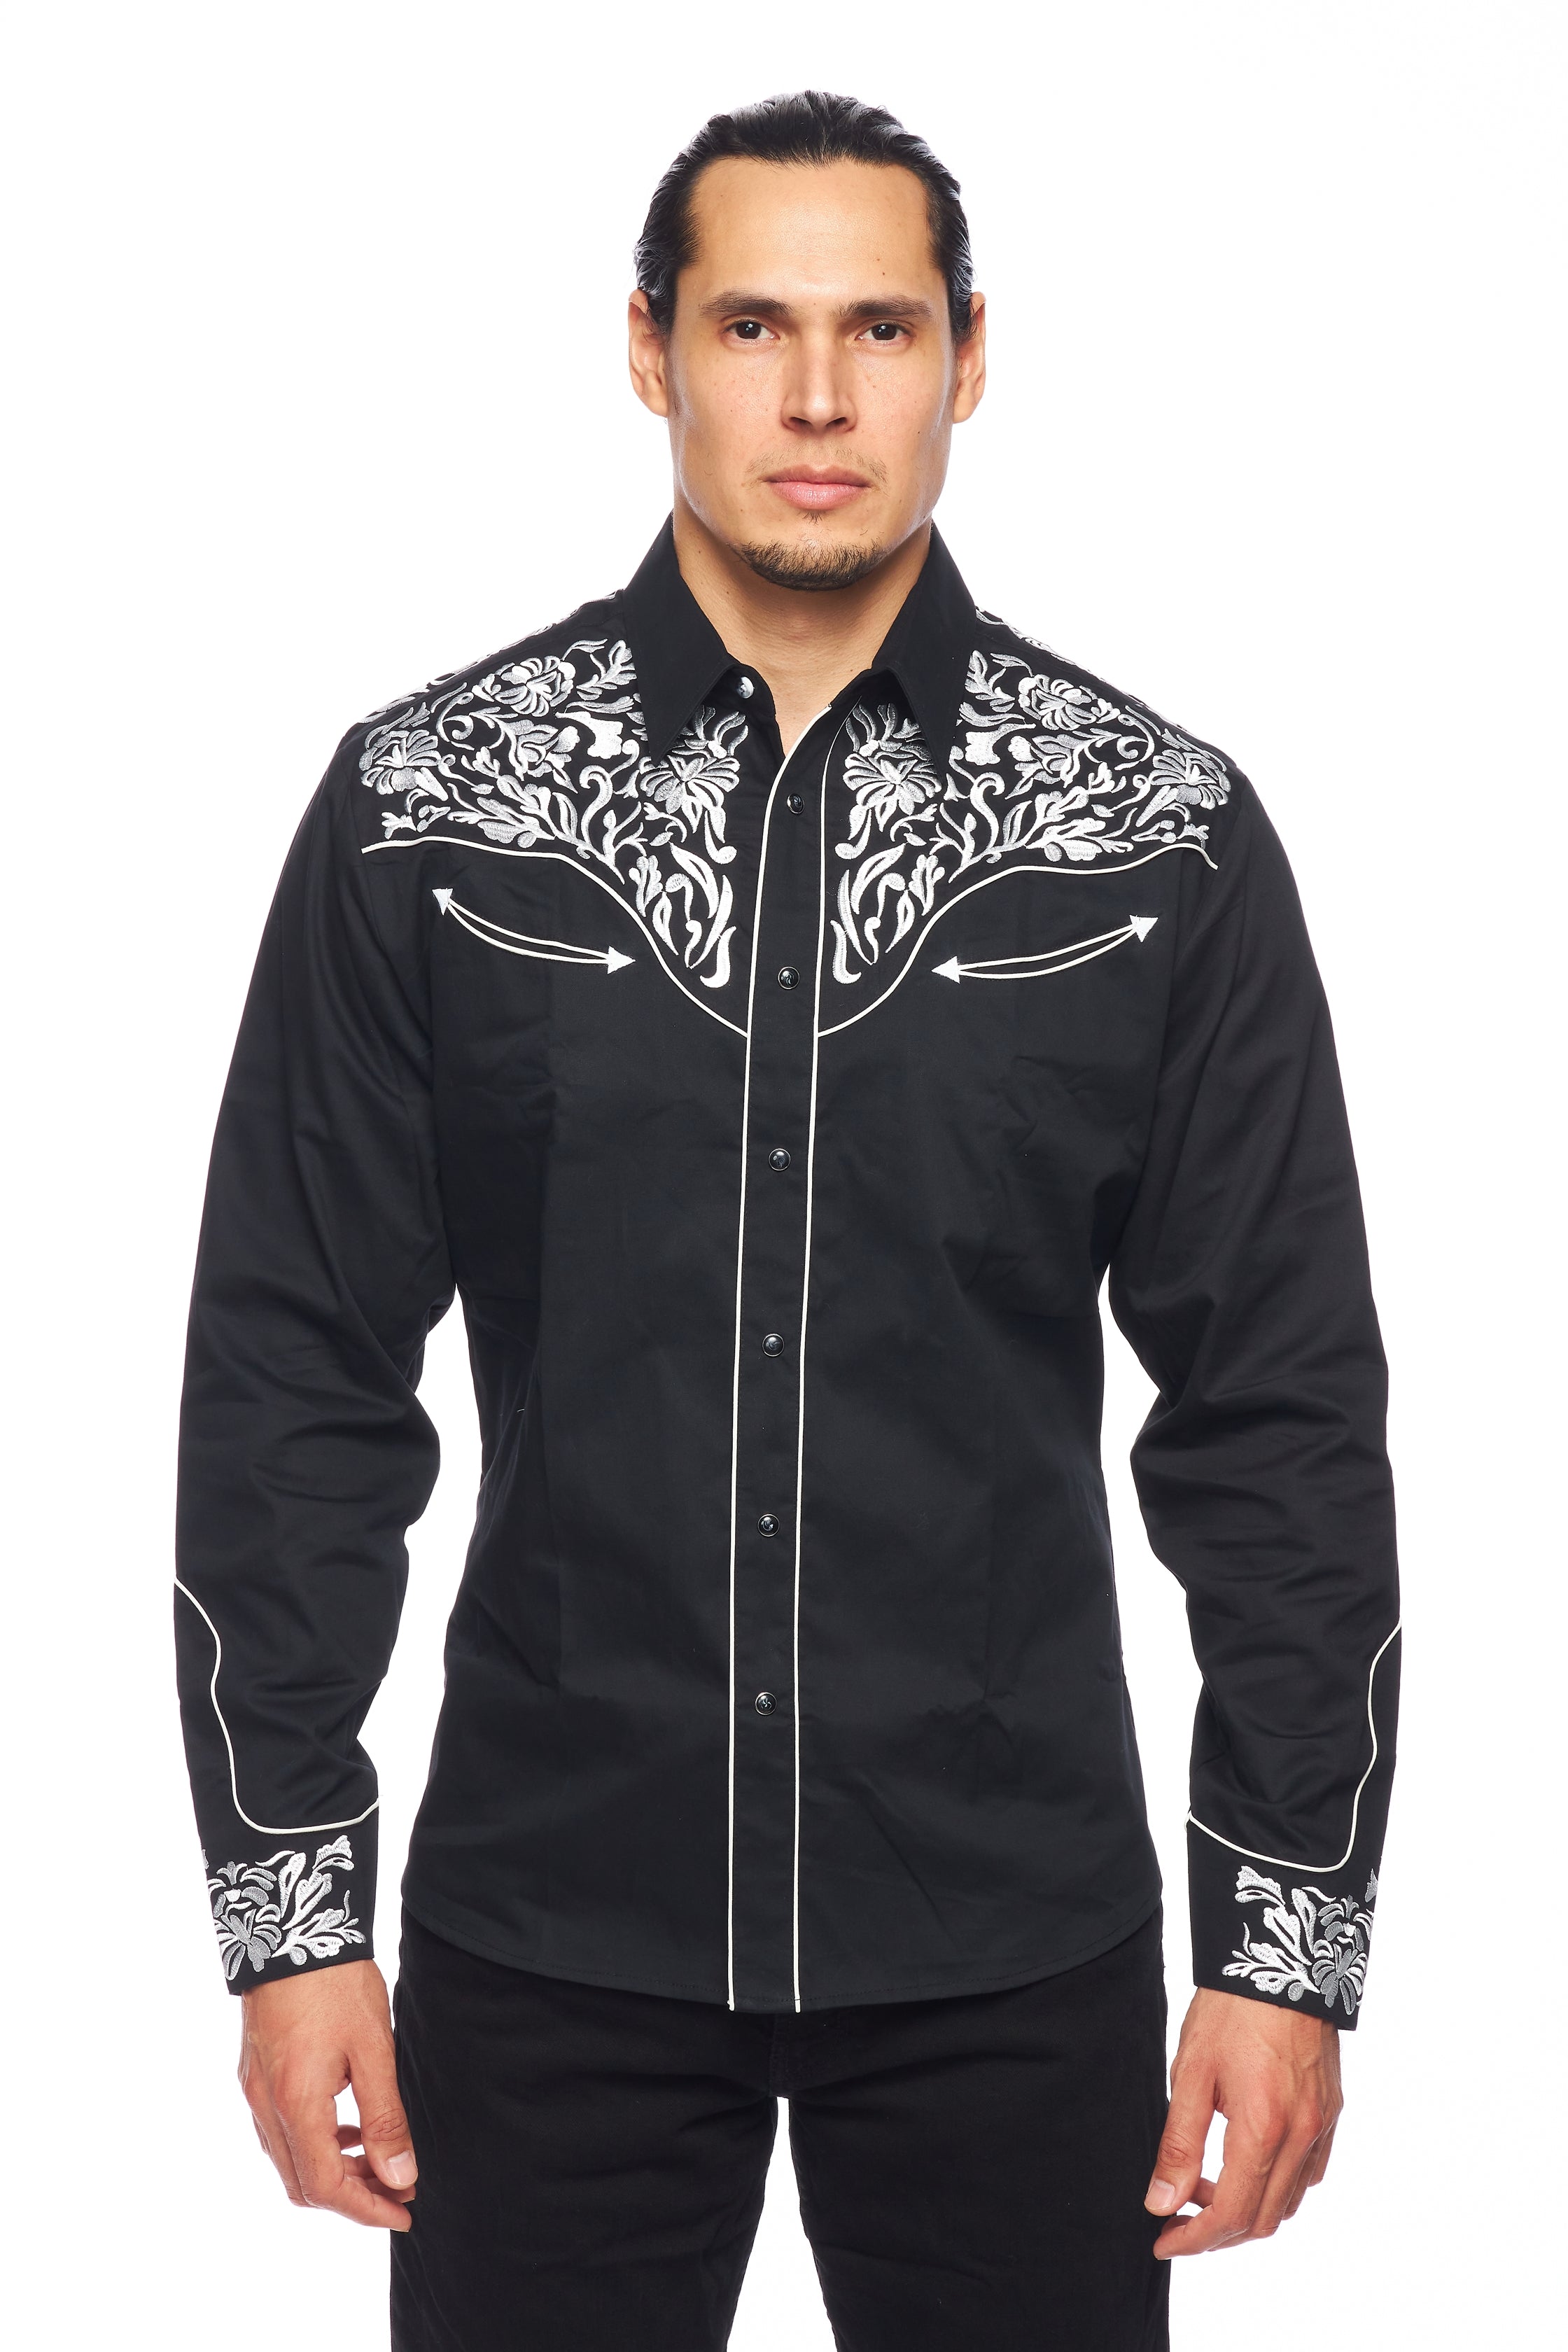 Men's Black Long Sleeve Western Shirt w White Floral Embroidery